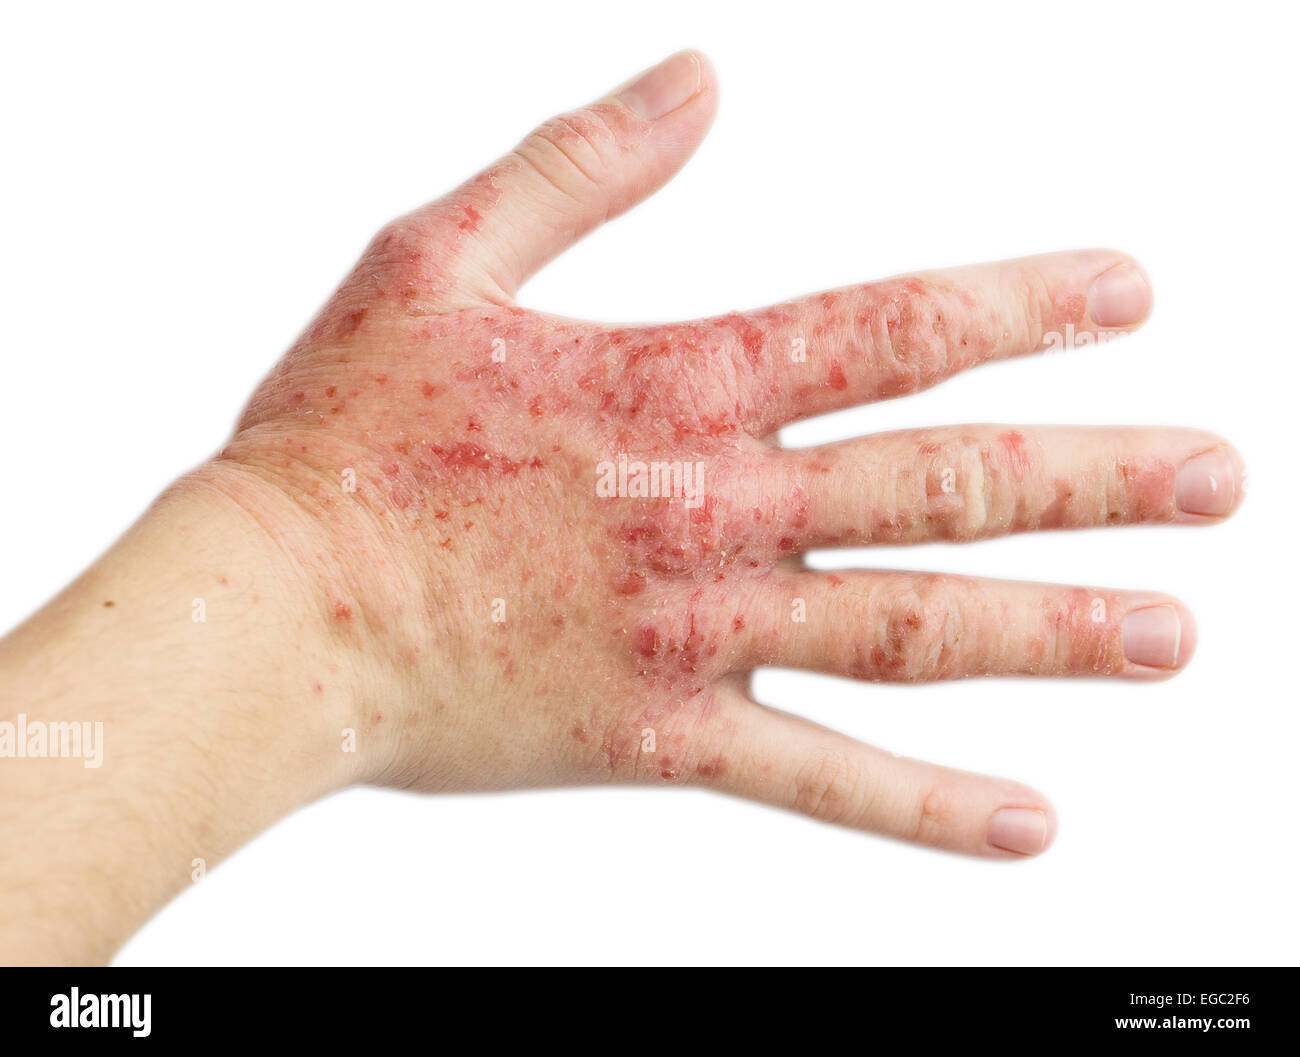 The problem with many people - eczema on hand. Isolated background Stock Photo